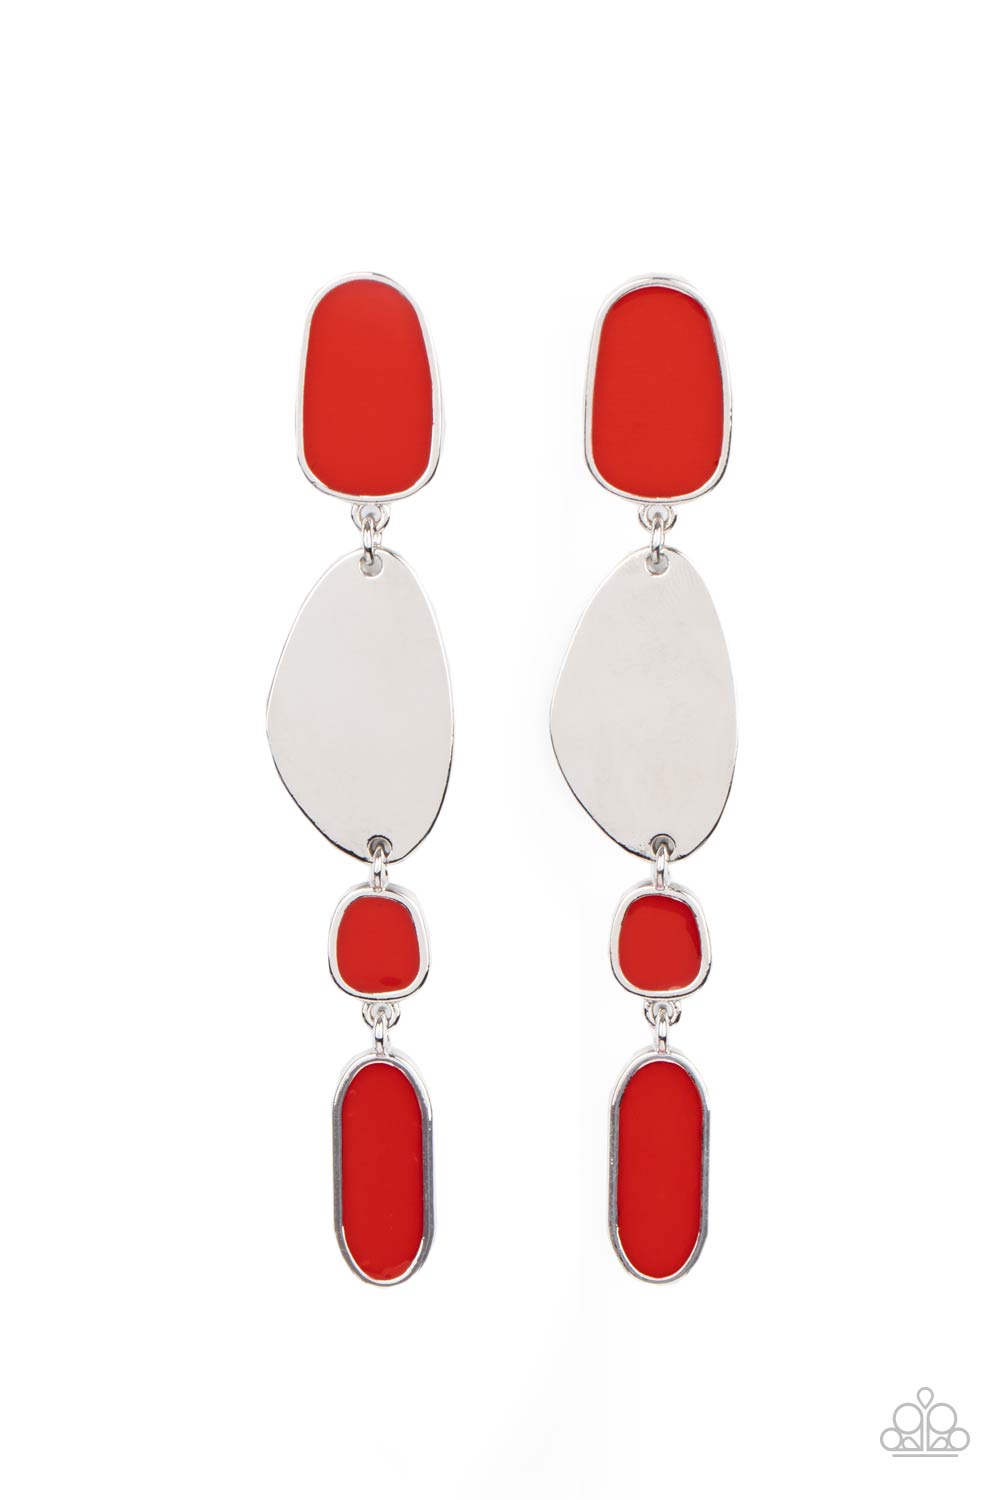 Paparazzi Deco By Design - Red Earrings - A Finishing Touch Jewelry